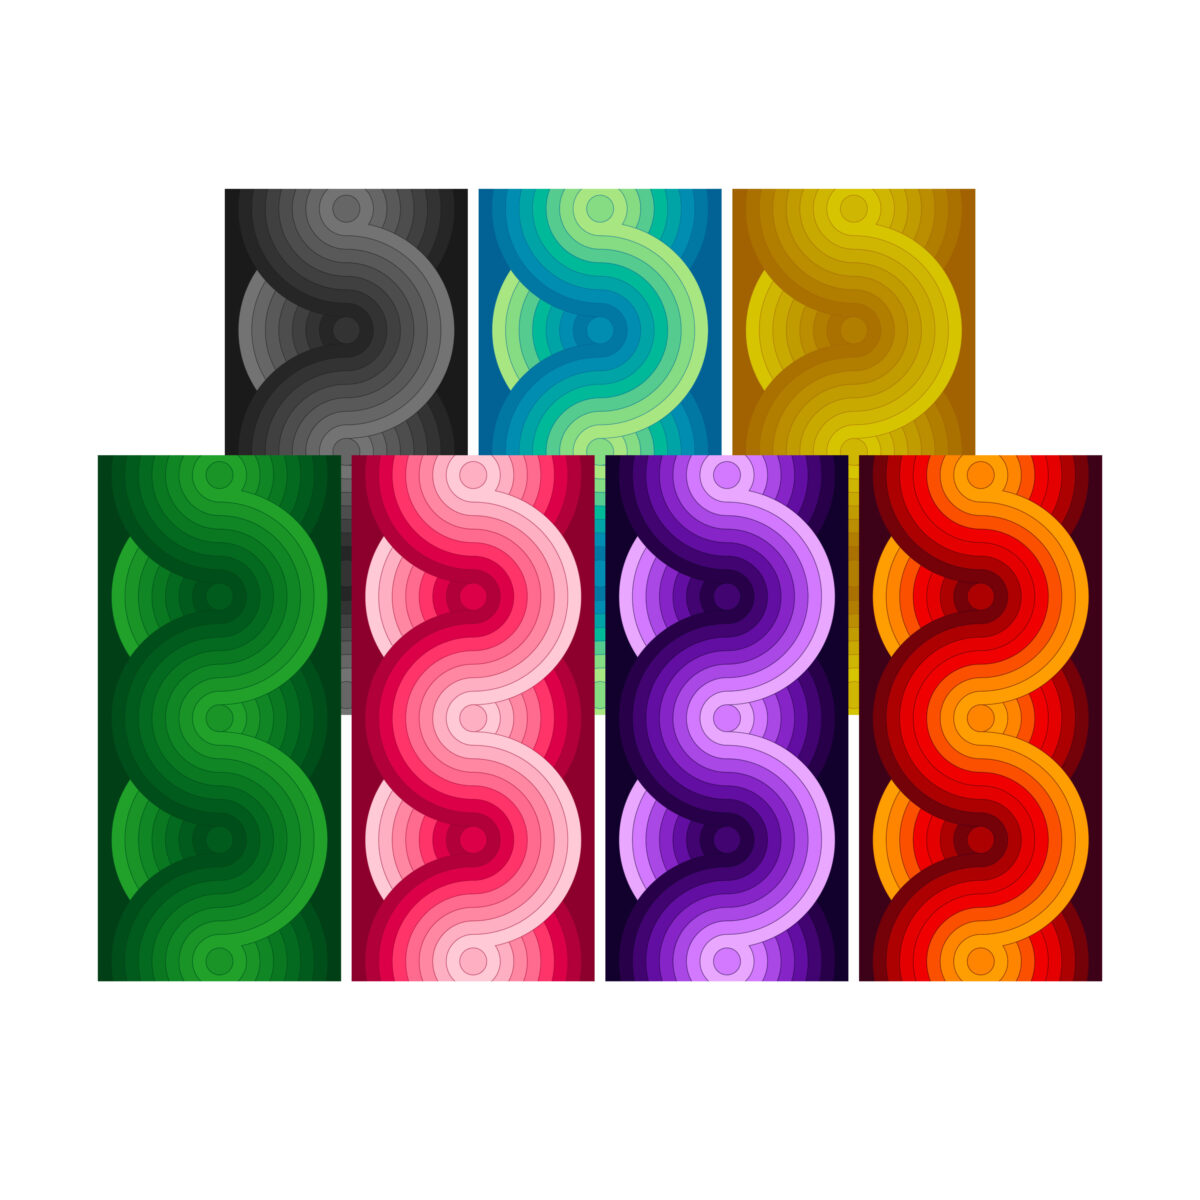 Seven different color variations included in the Curls mobile wallpaper pack